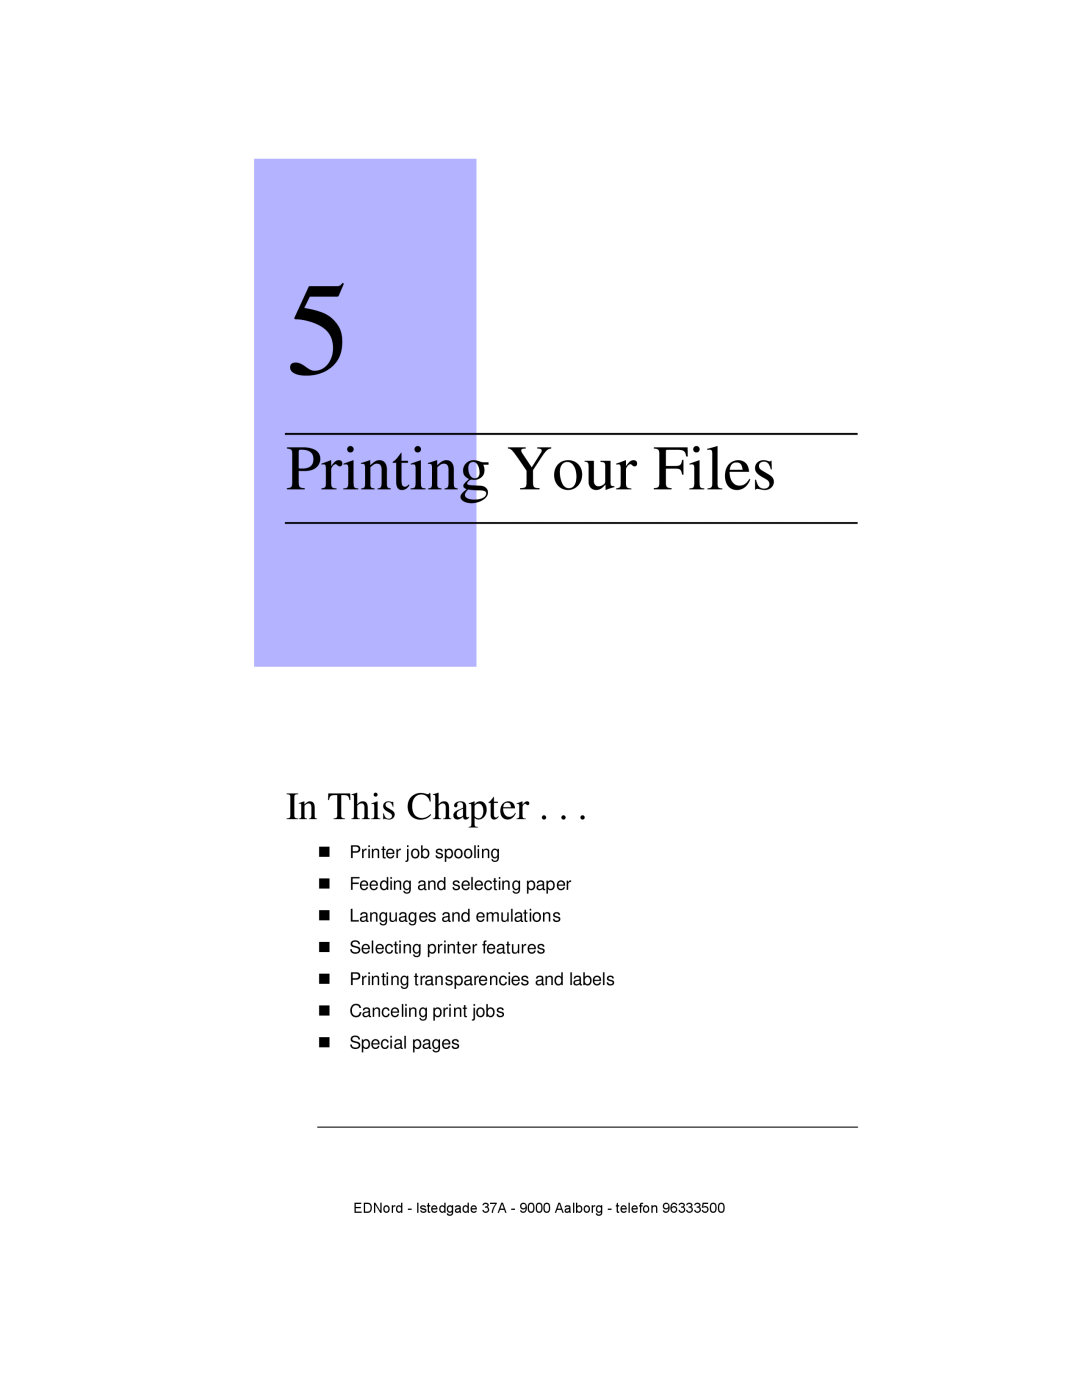 IBM QMS 4525 Printing Your Files, In This Chapter, „ Printer job spooling „ Feeding and selecting paper, „ Special pages 